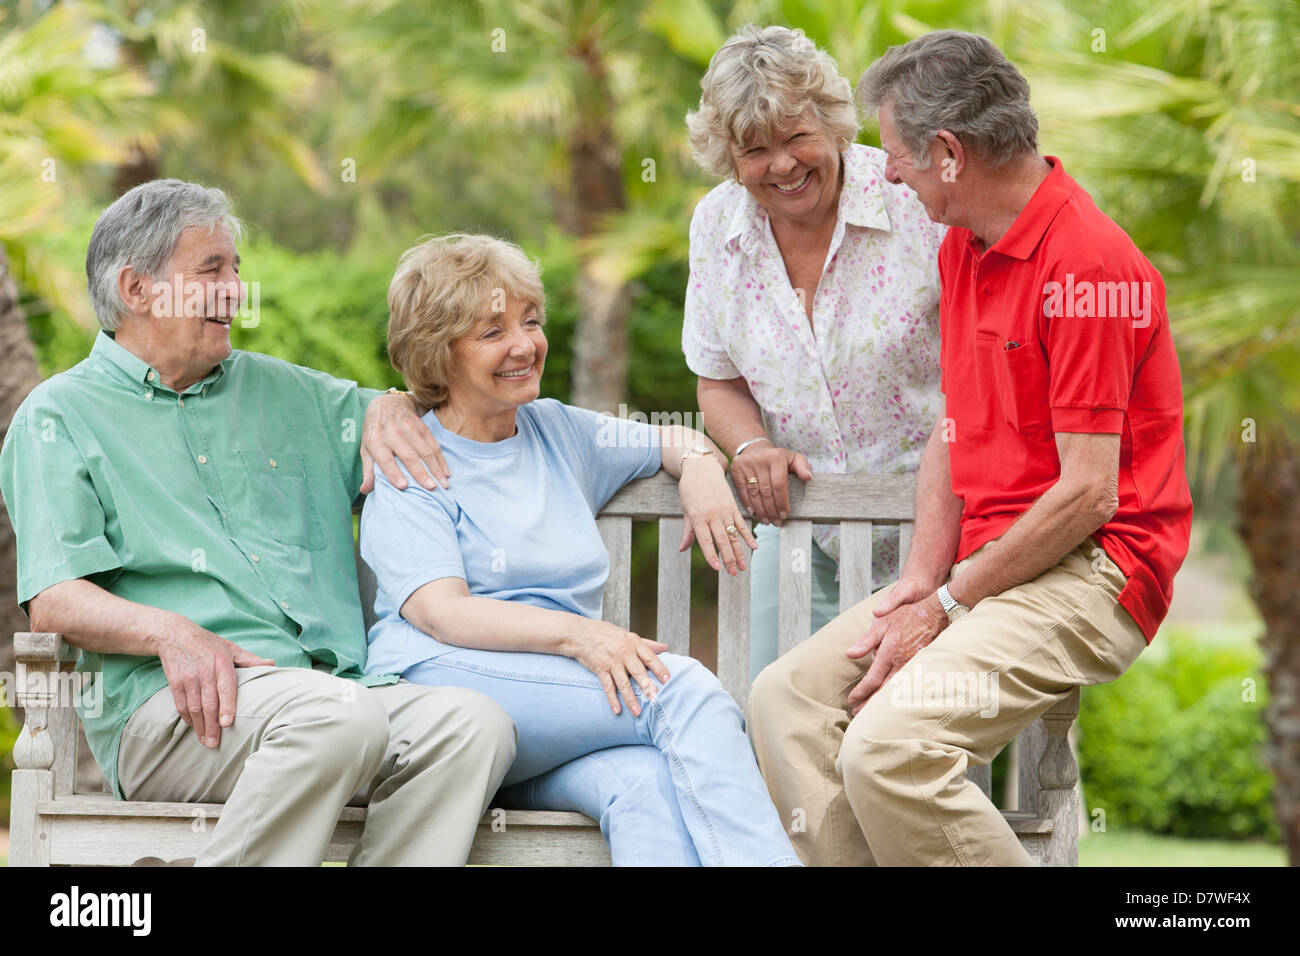 two-elderly-couples-sitting-on-a-bench-in-the-garden-D7WF4X.jpg